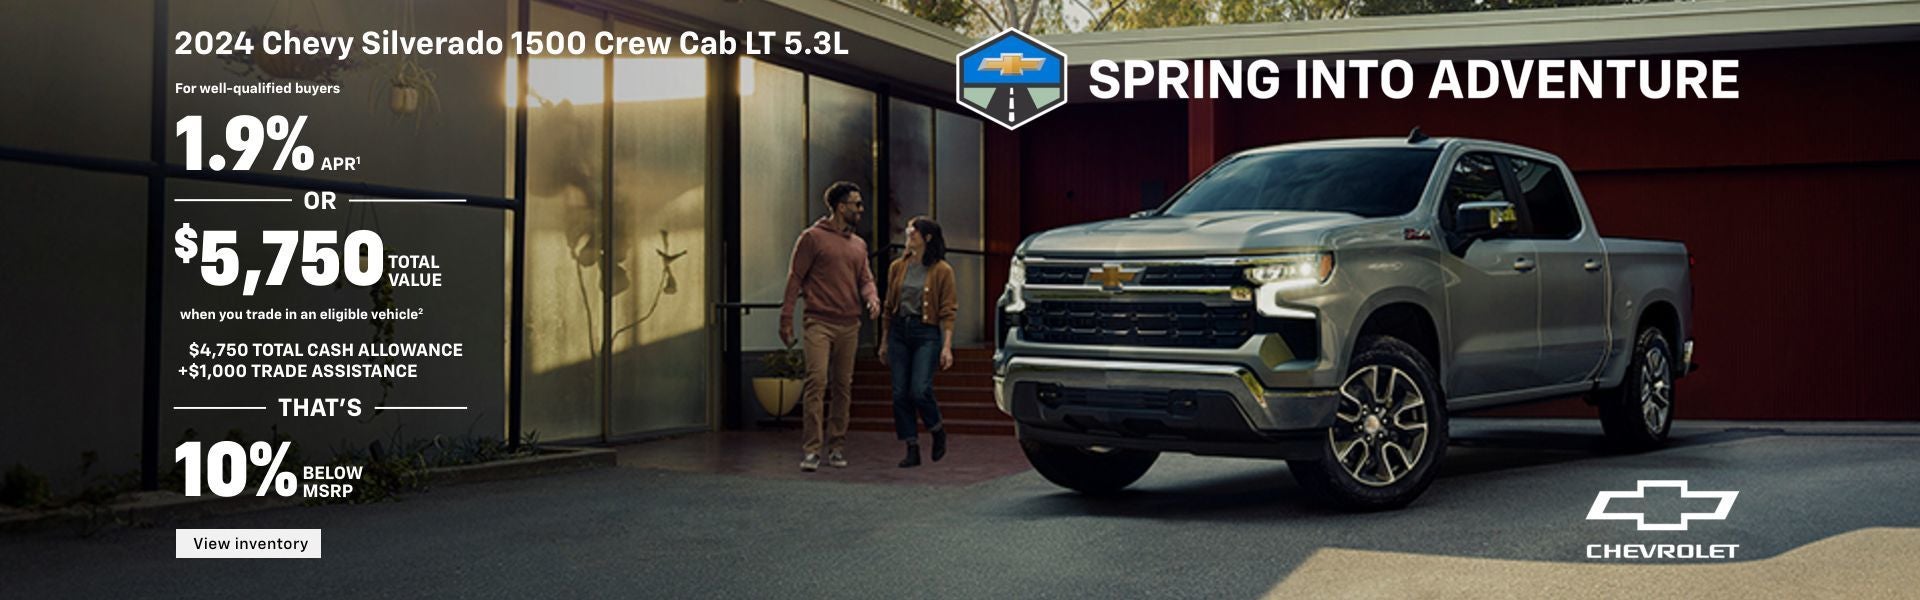 2024 Chevy Silverado 1500 LT 5.3L. For well-qualified buyers 1.9% APR. Or, $5,750 total value whe...